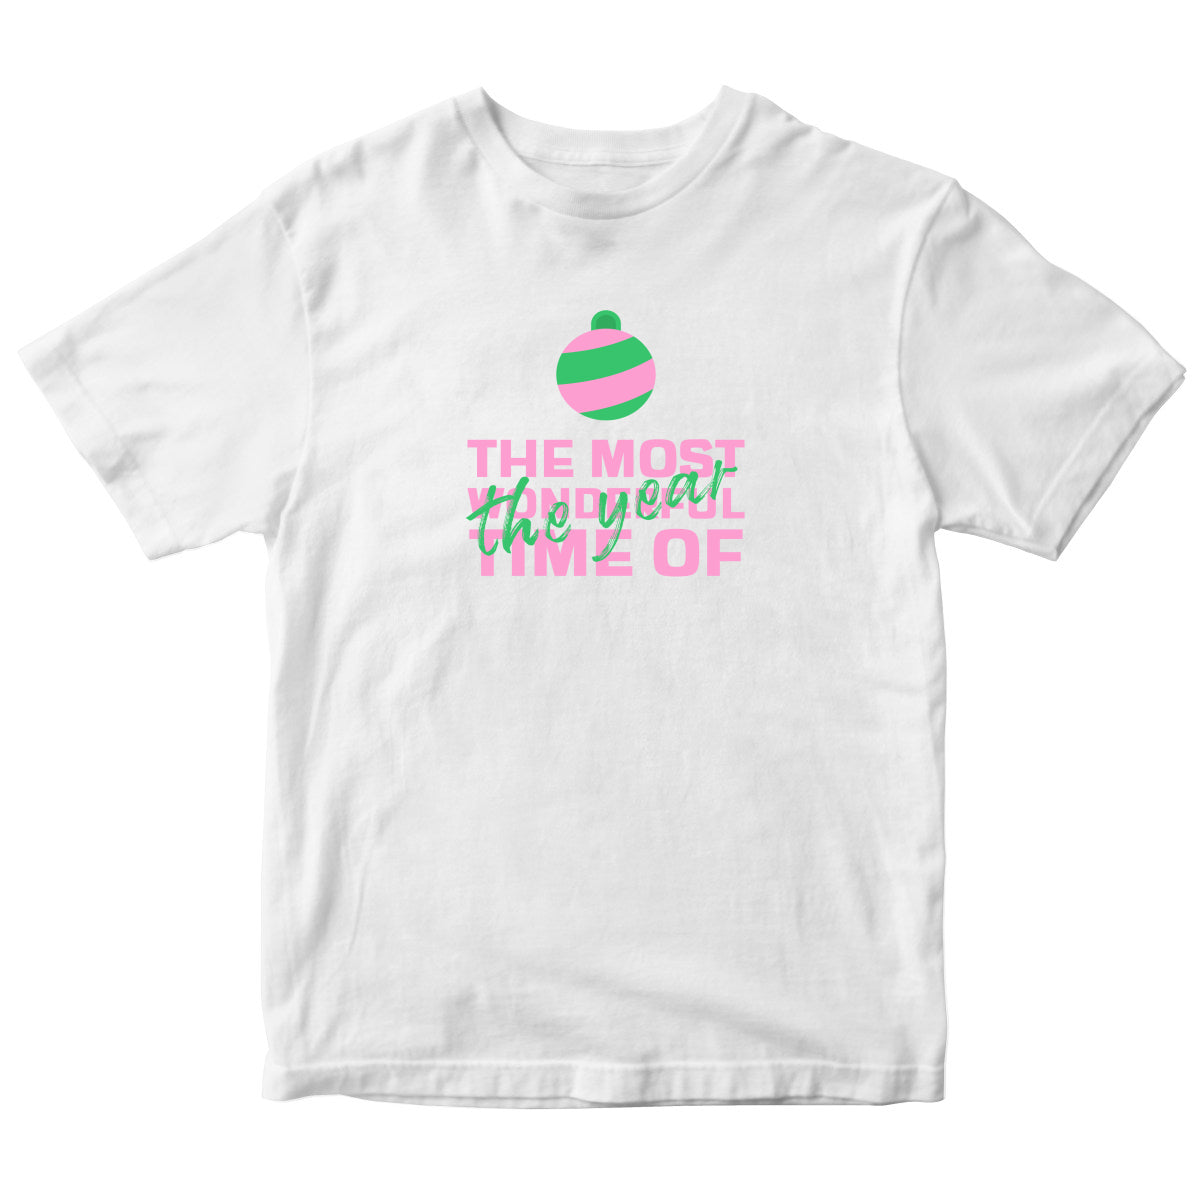 The Most Wonderful Time of the Year Kids T-shirt